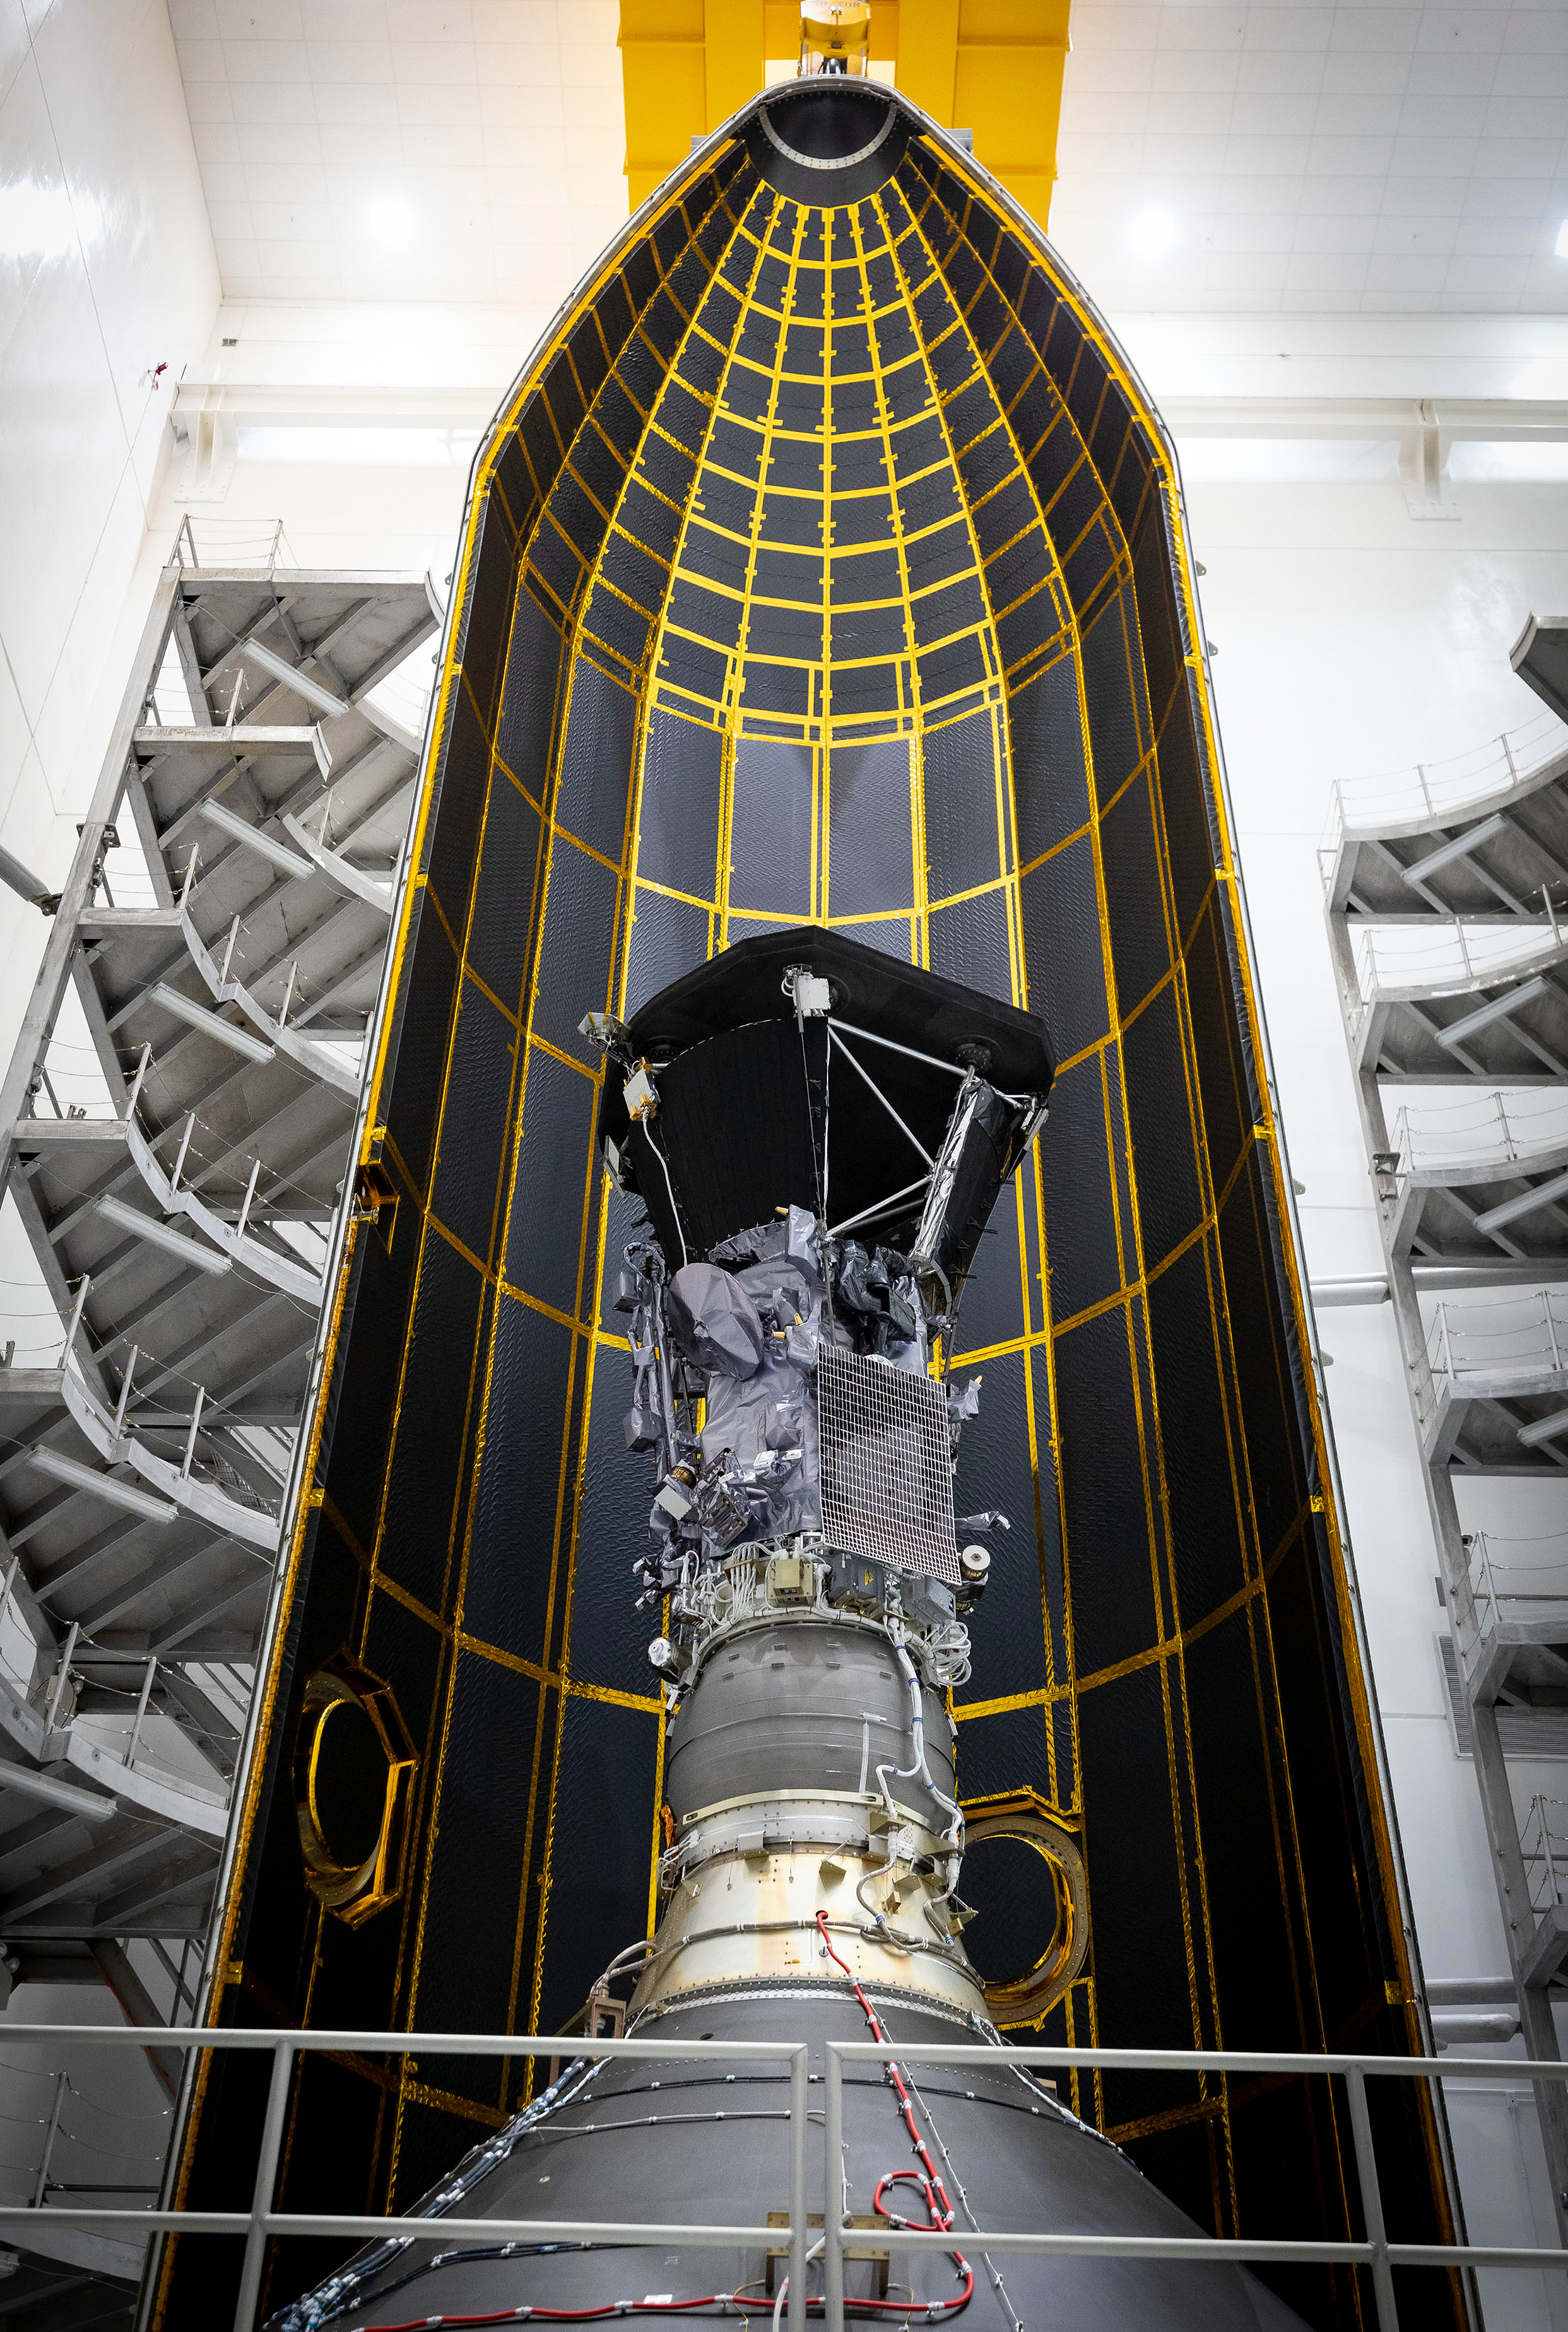 Parker Solar Probe awaits closure of its fairing and eventual transport to the launch pad in 2018.